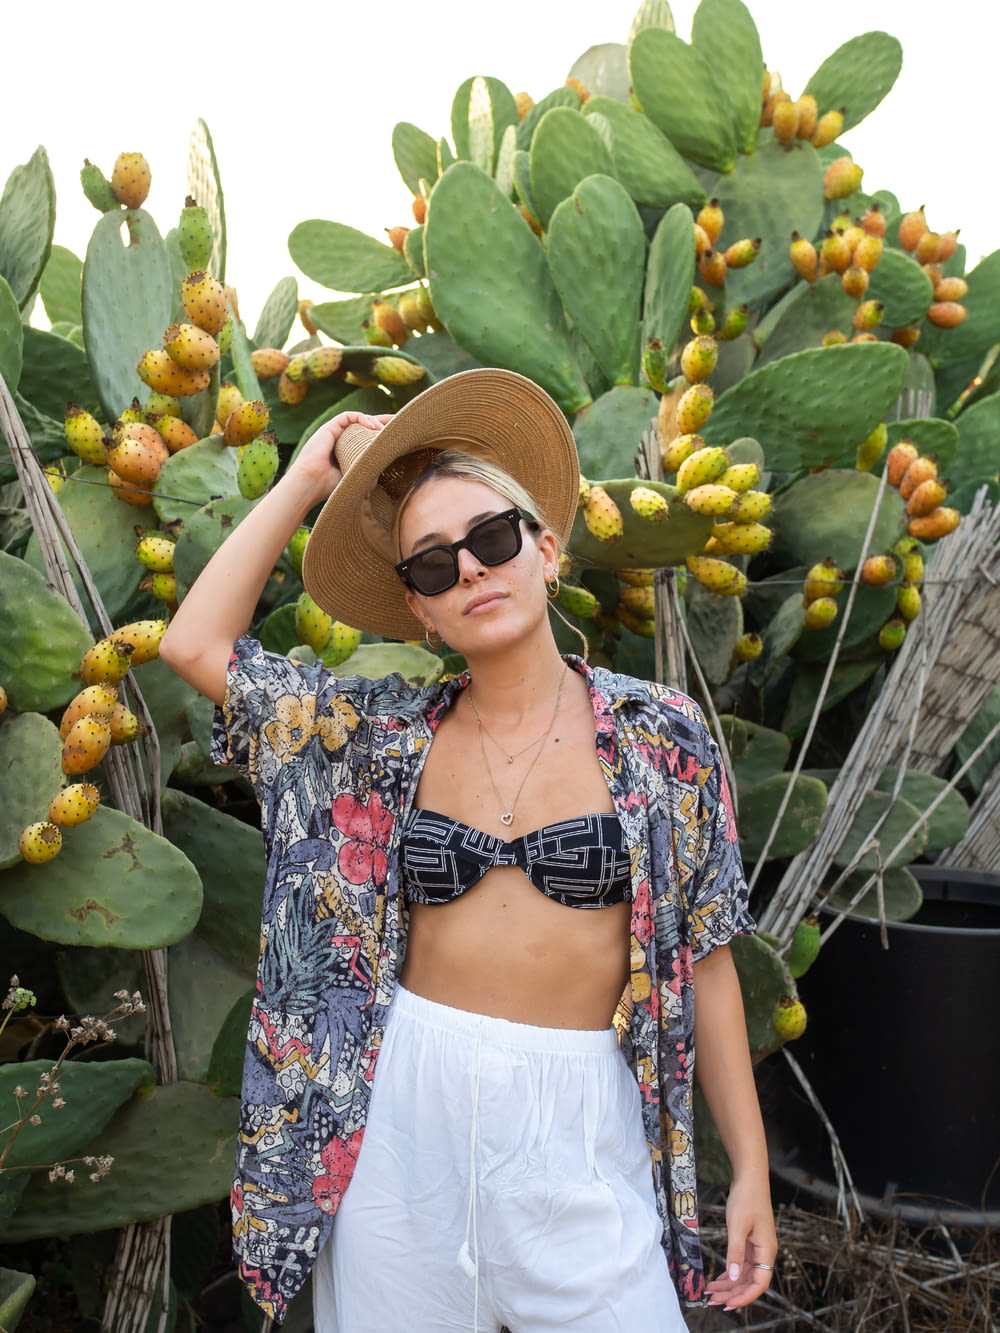 a person wearing a hat and sunglasses standing in front of a bunch of fruit